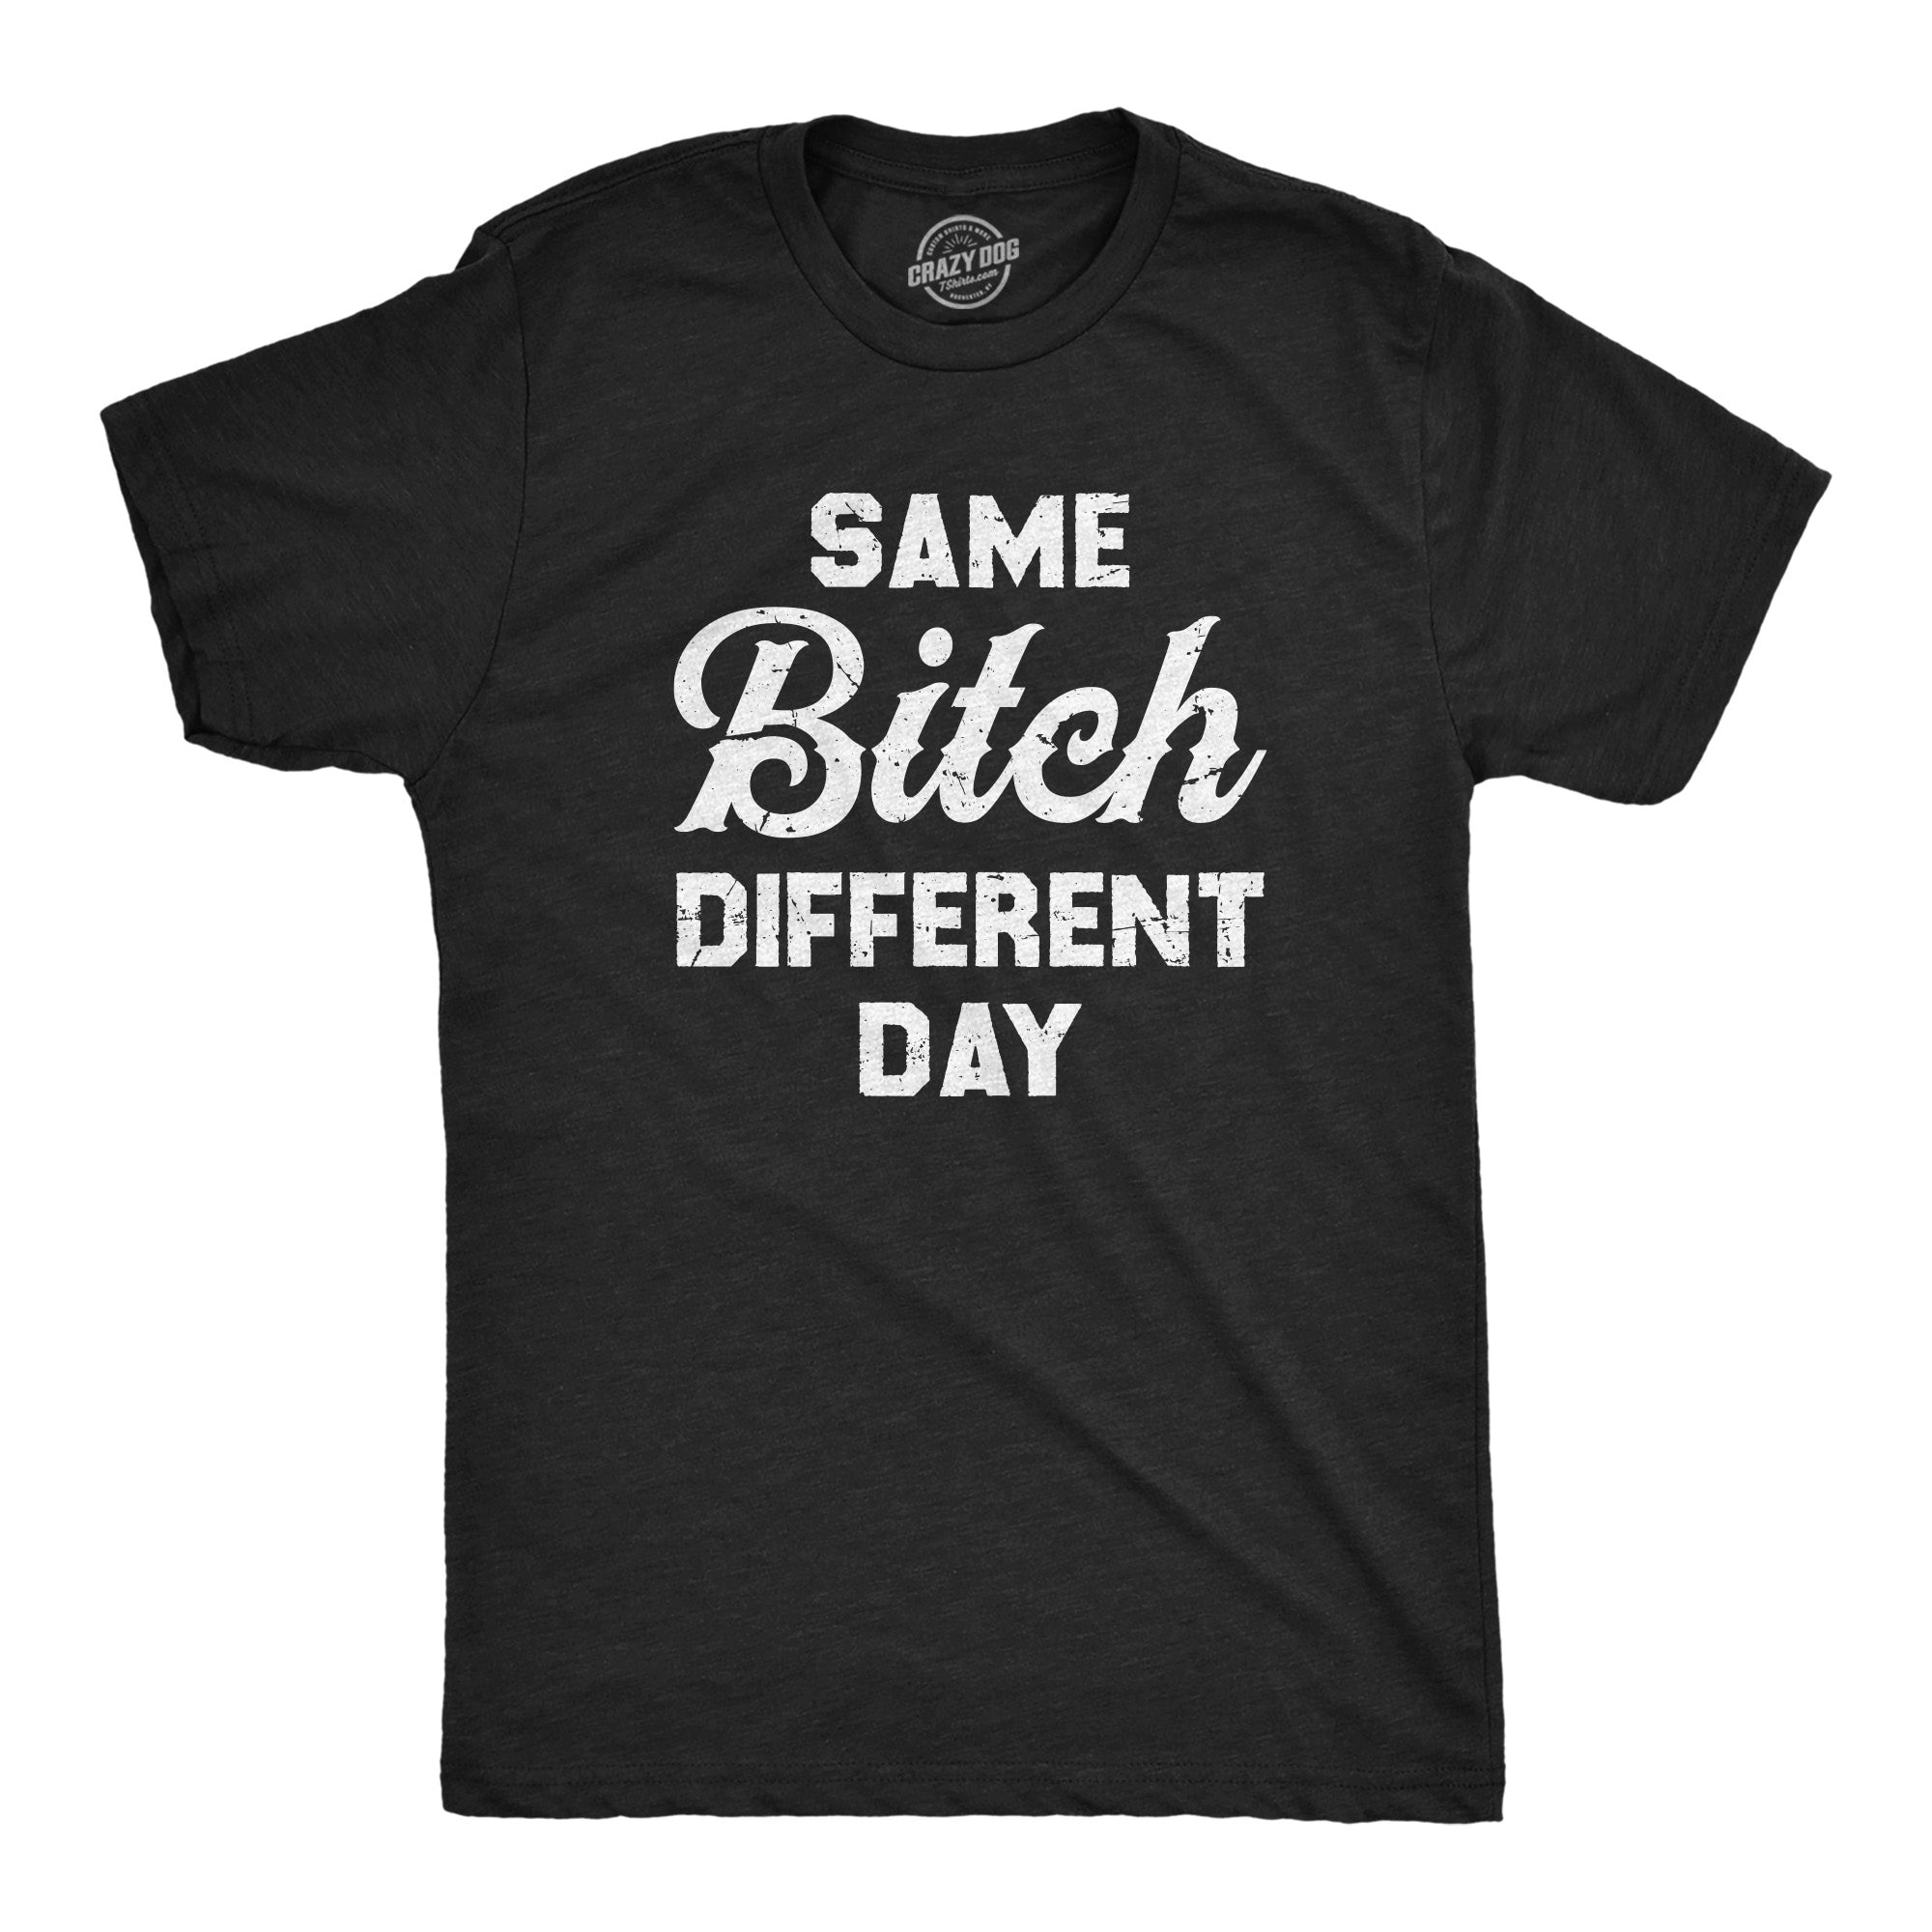 Funny Heather Black - BITCH Same Bitch Different Day Mens T Shirt Nerdy Sarcastic Tee